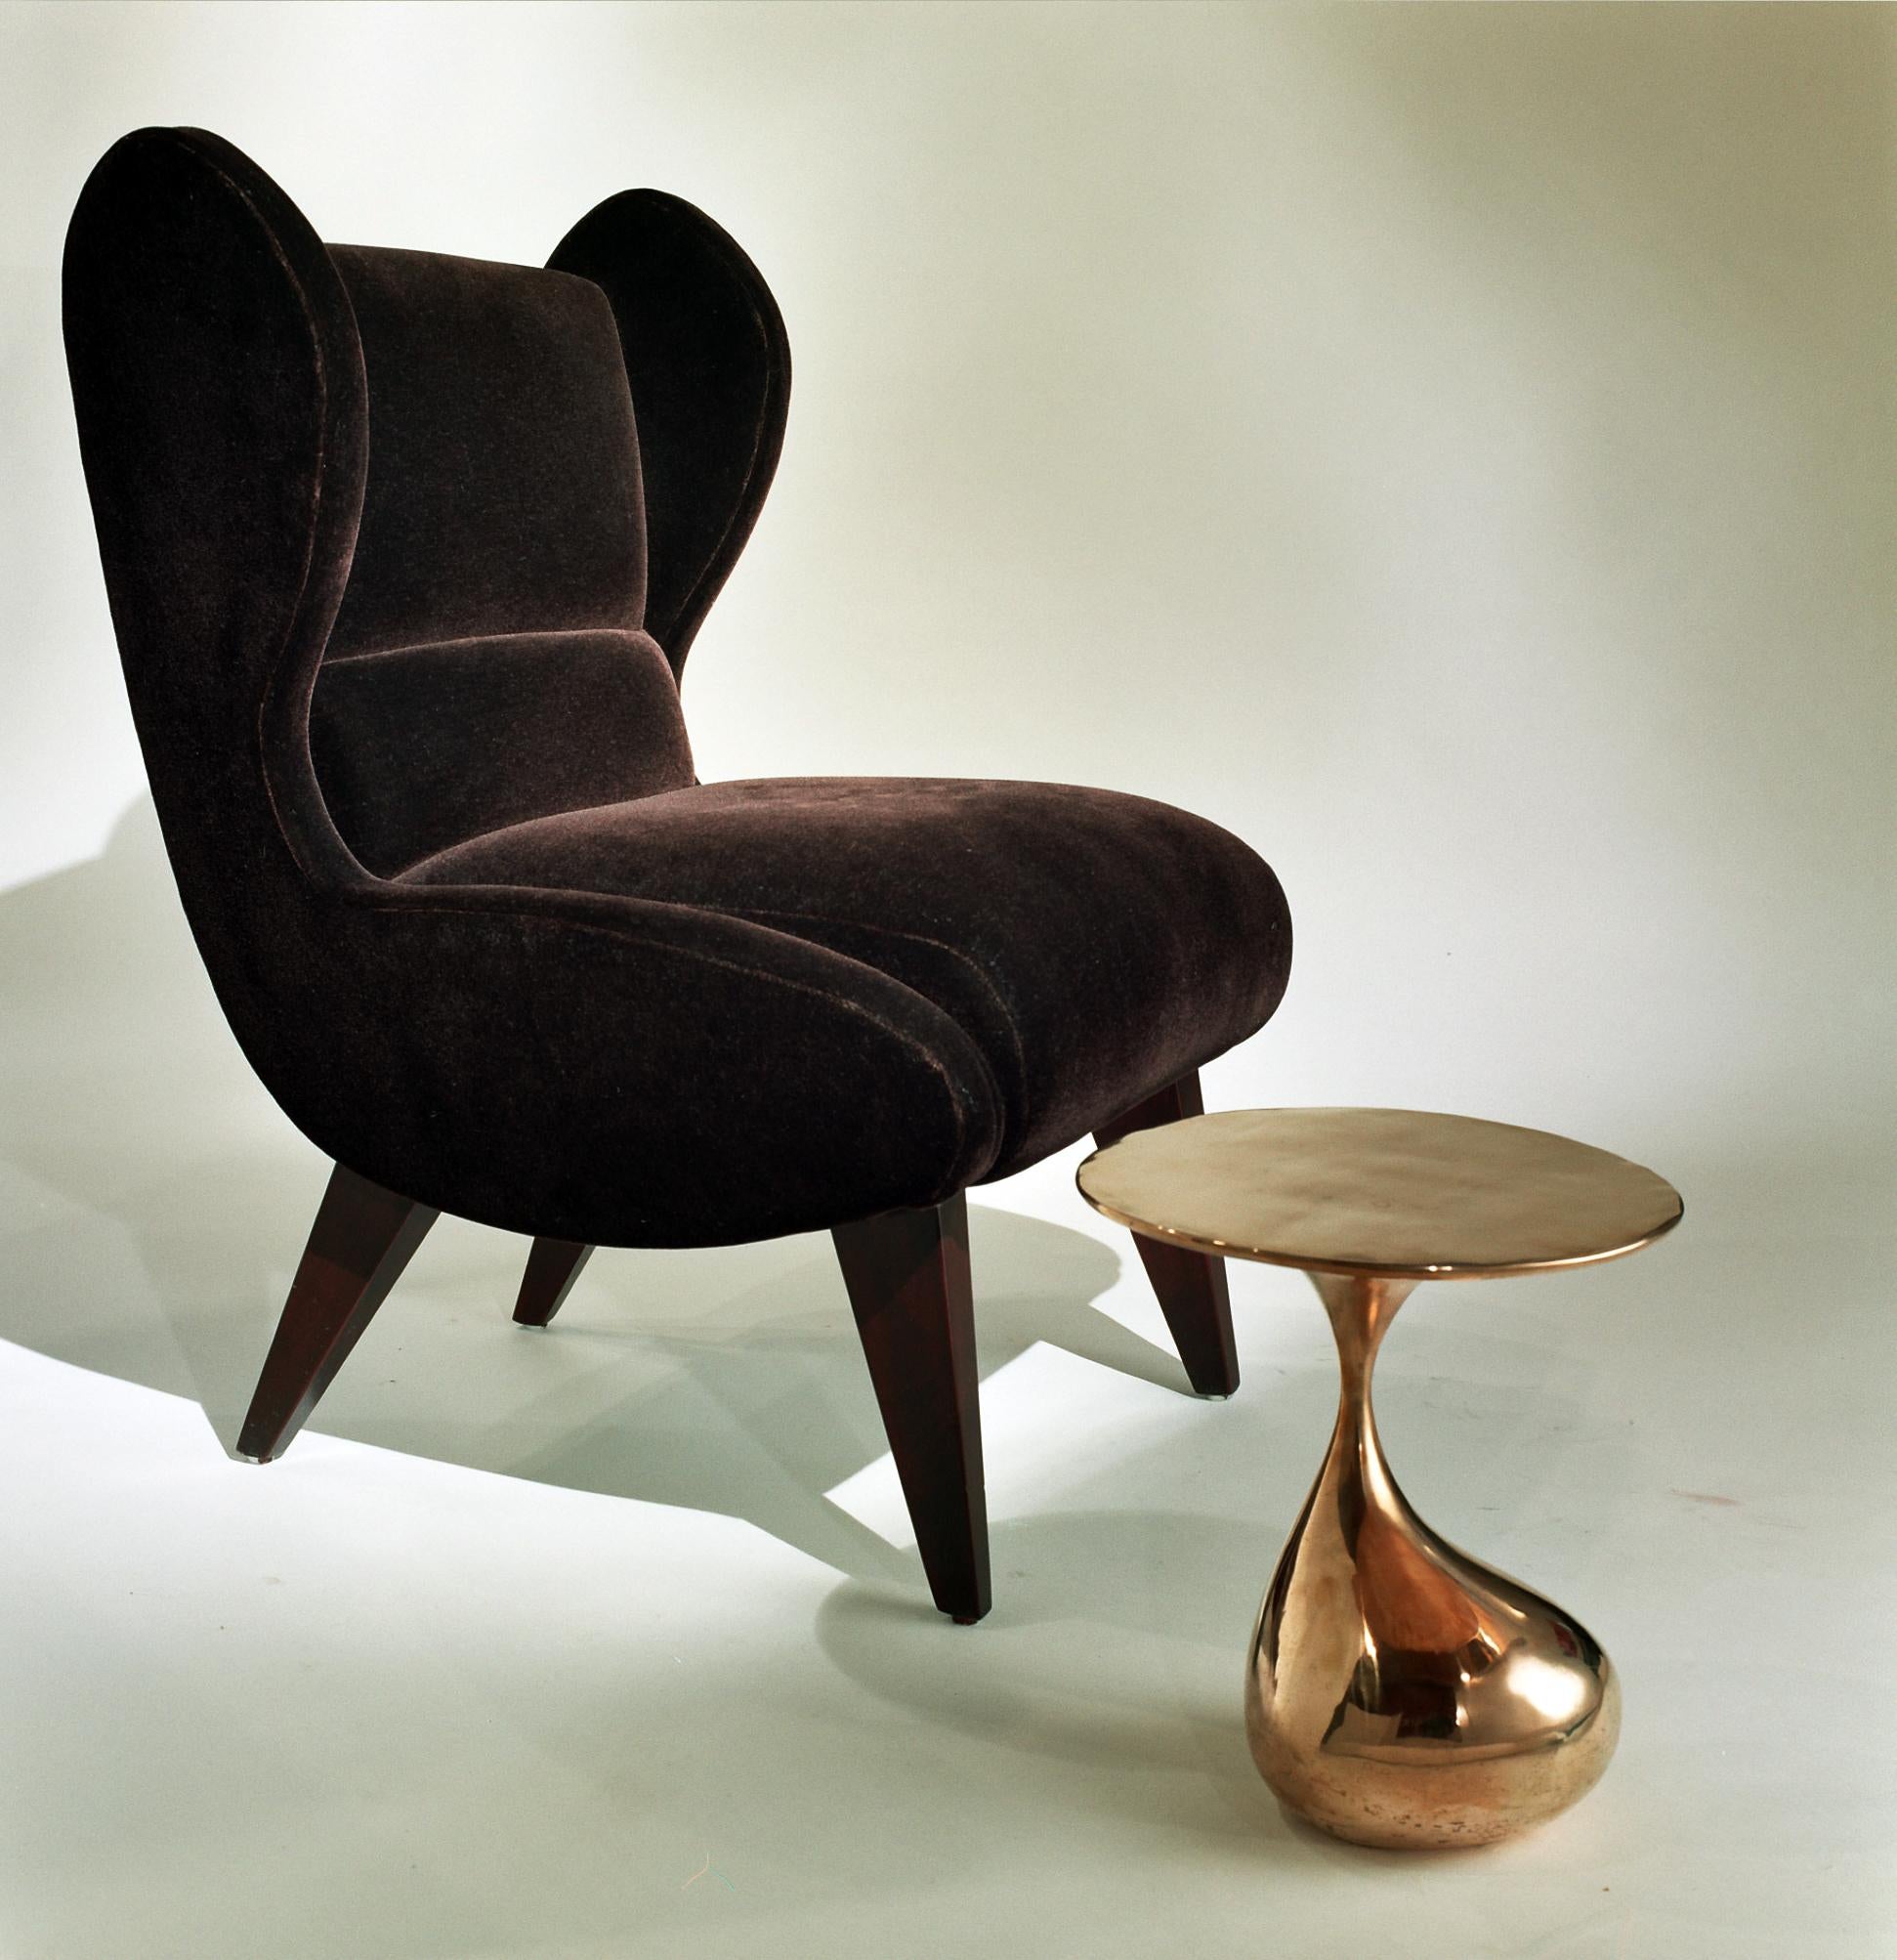 American Wingback Lounge Chair for PortHouse, Mohair + Maple, Jordan Mozer USA, C. 2003 For Sale